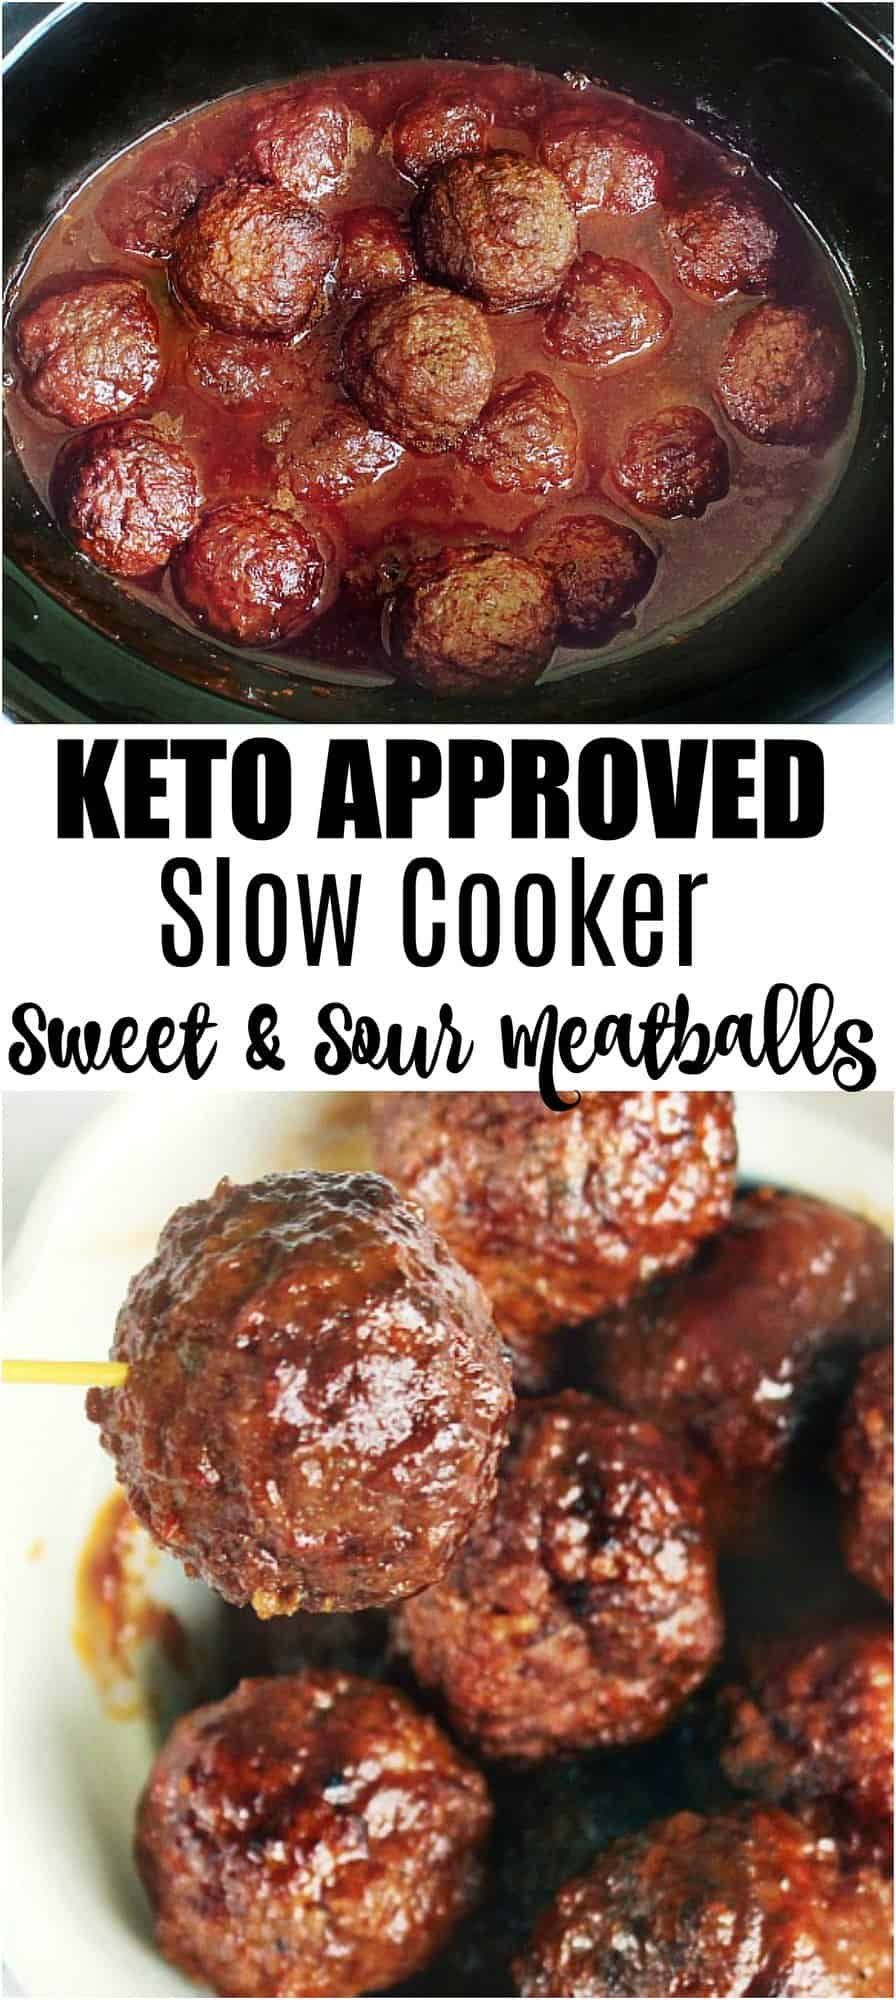 Low Carb Slow Cooker Meatballs -   12 healthy recipes Dinner low carb ideas